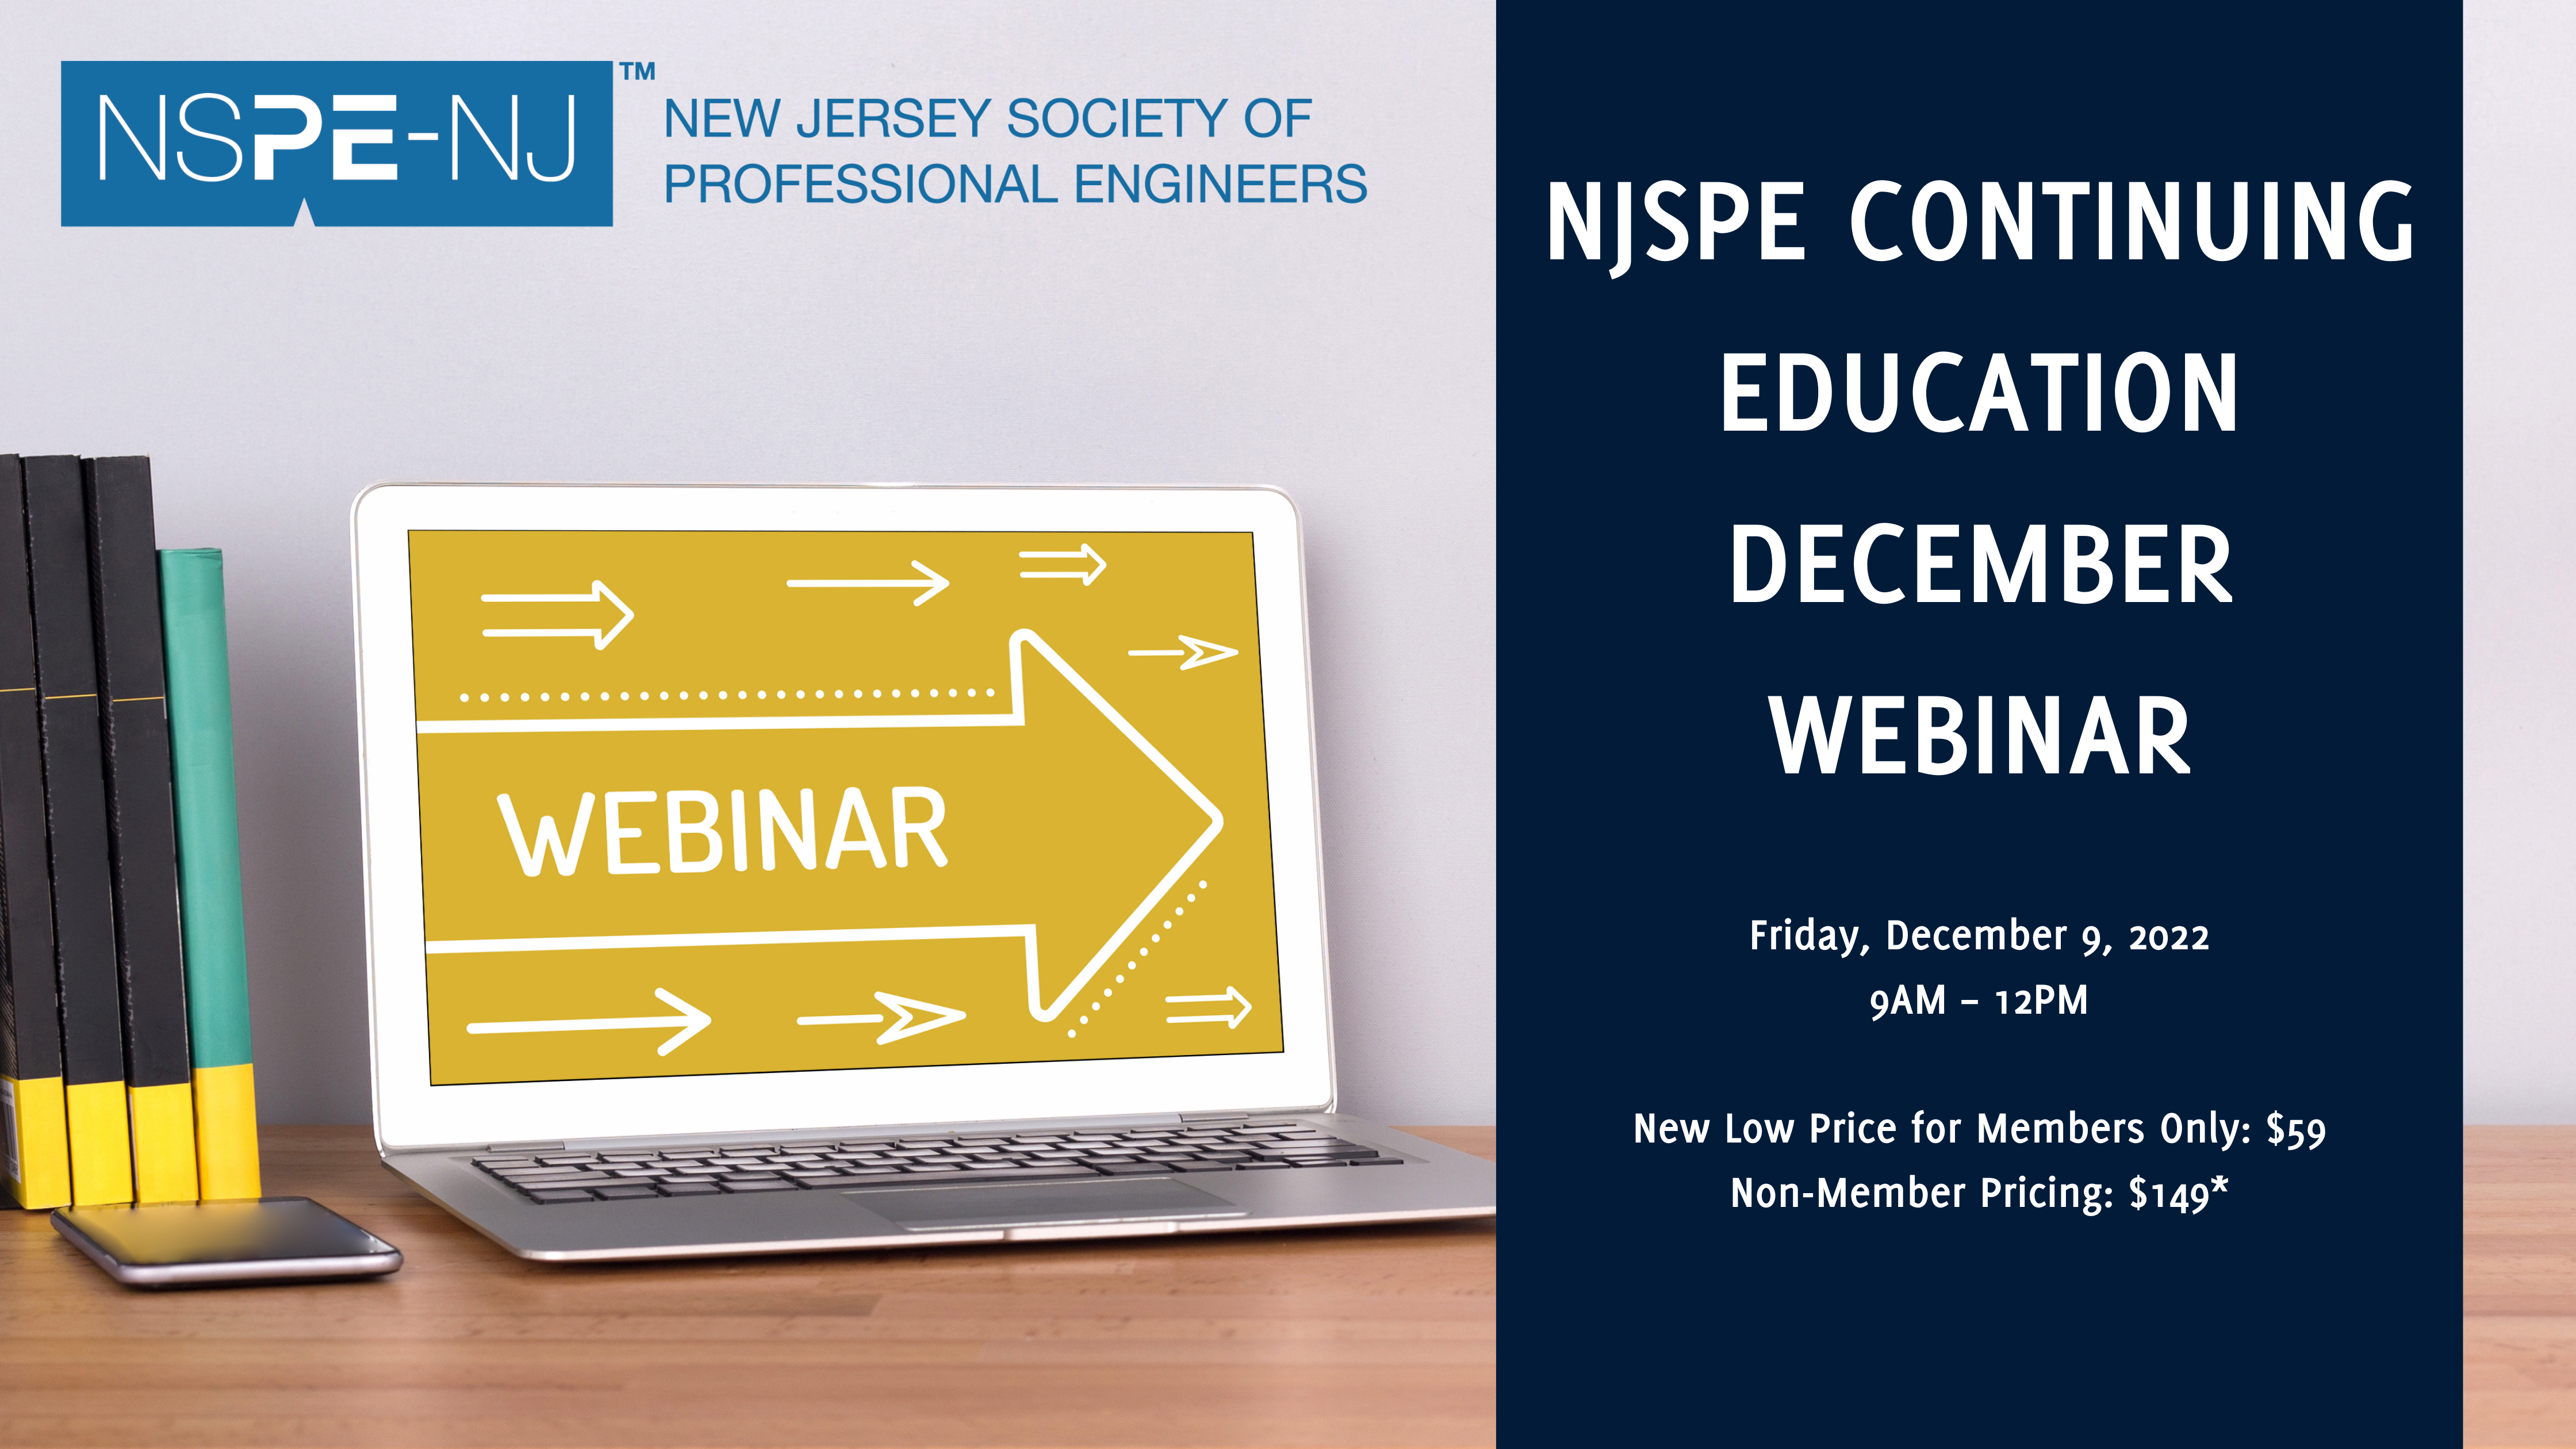 New Continuing Education Opportunity: DECEMBER WEBINAR